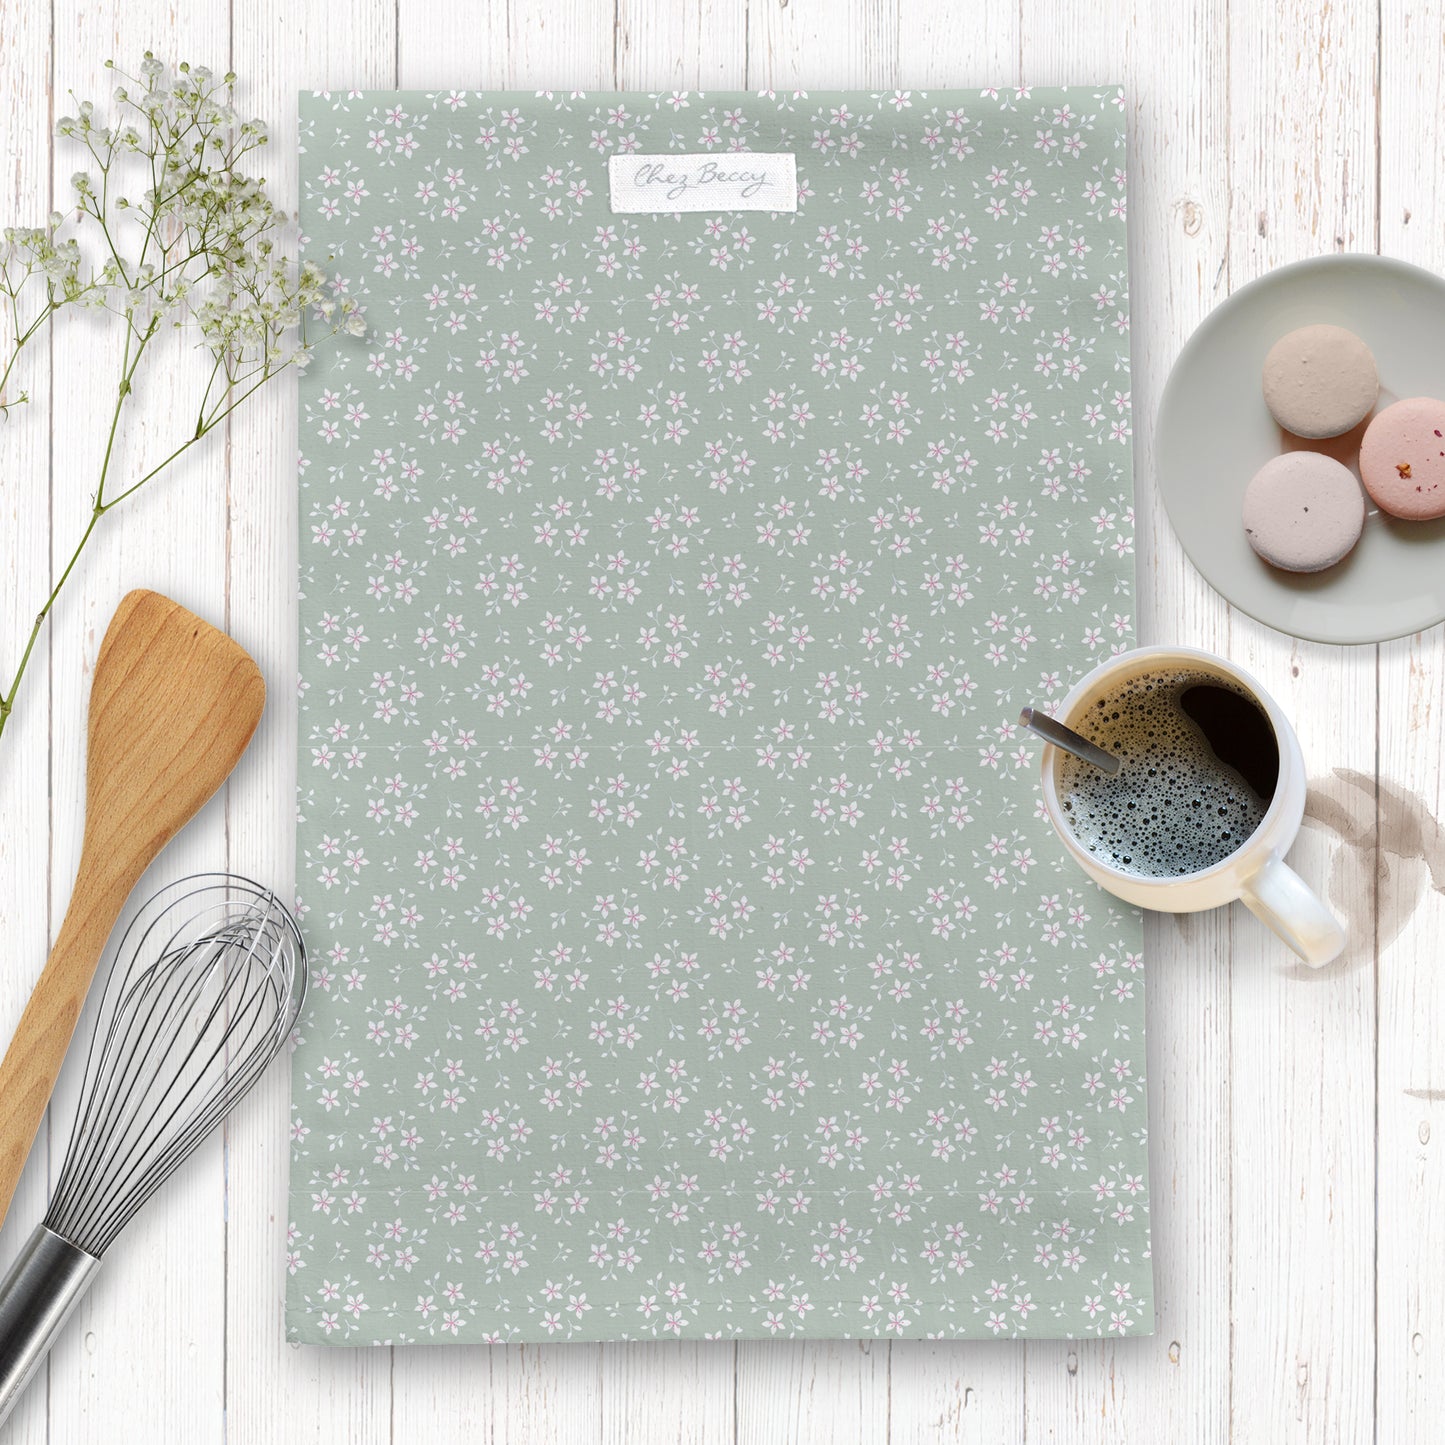 Sage green tea towel with little white flowers on a wooden background with baking props